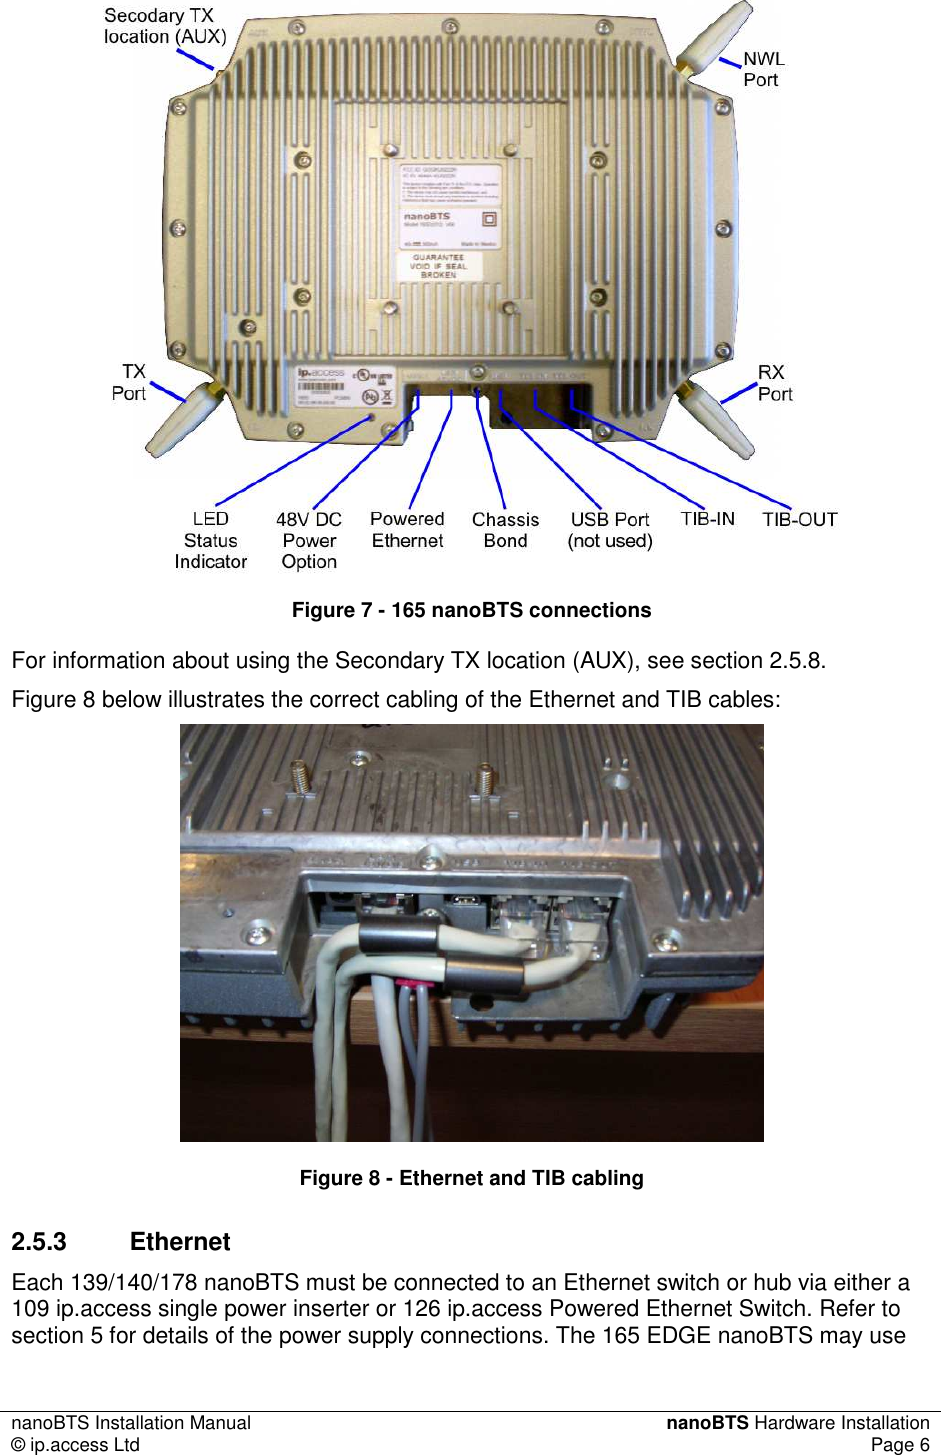 nanoBTS Installation Manual  nanoBTS Hardware Installation © ip.access Ltd  Page 6   Figure 7 - 165 nanoBTS connections For information about using the Secondary TX location (AUX), see section 2.5.8. Figure 8 below illustrates the correct cabling of the Ethernet and TIB cables:  Figure 8 - Ethernet and TIB cabling 2.5.3  Ethernet Each 139/140/178 nanoBTS must be connected to an Ethernet switch or hub via either a 109 ip.access single power inserter or 126 ip.access Powered Ethernet Switch. Refer to section 5 for details of the power supply connections. The 165 EDGE nanoBTS may use 